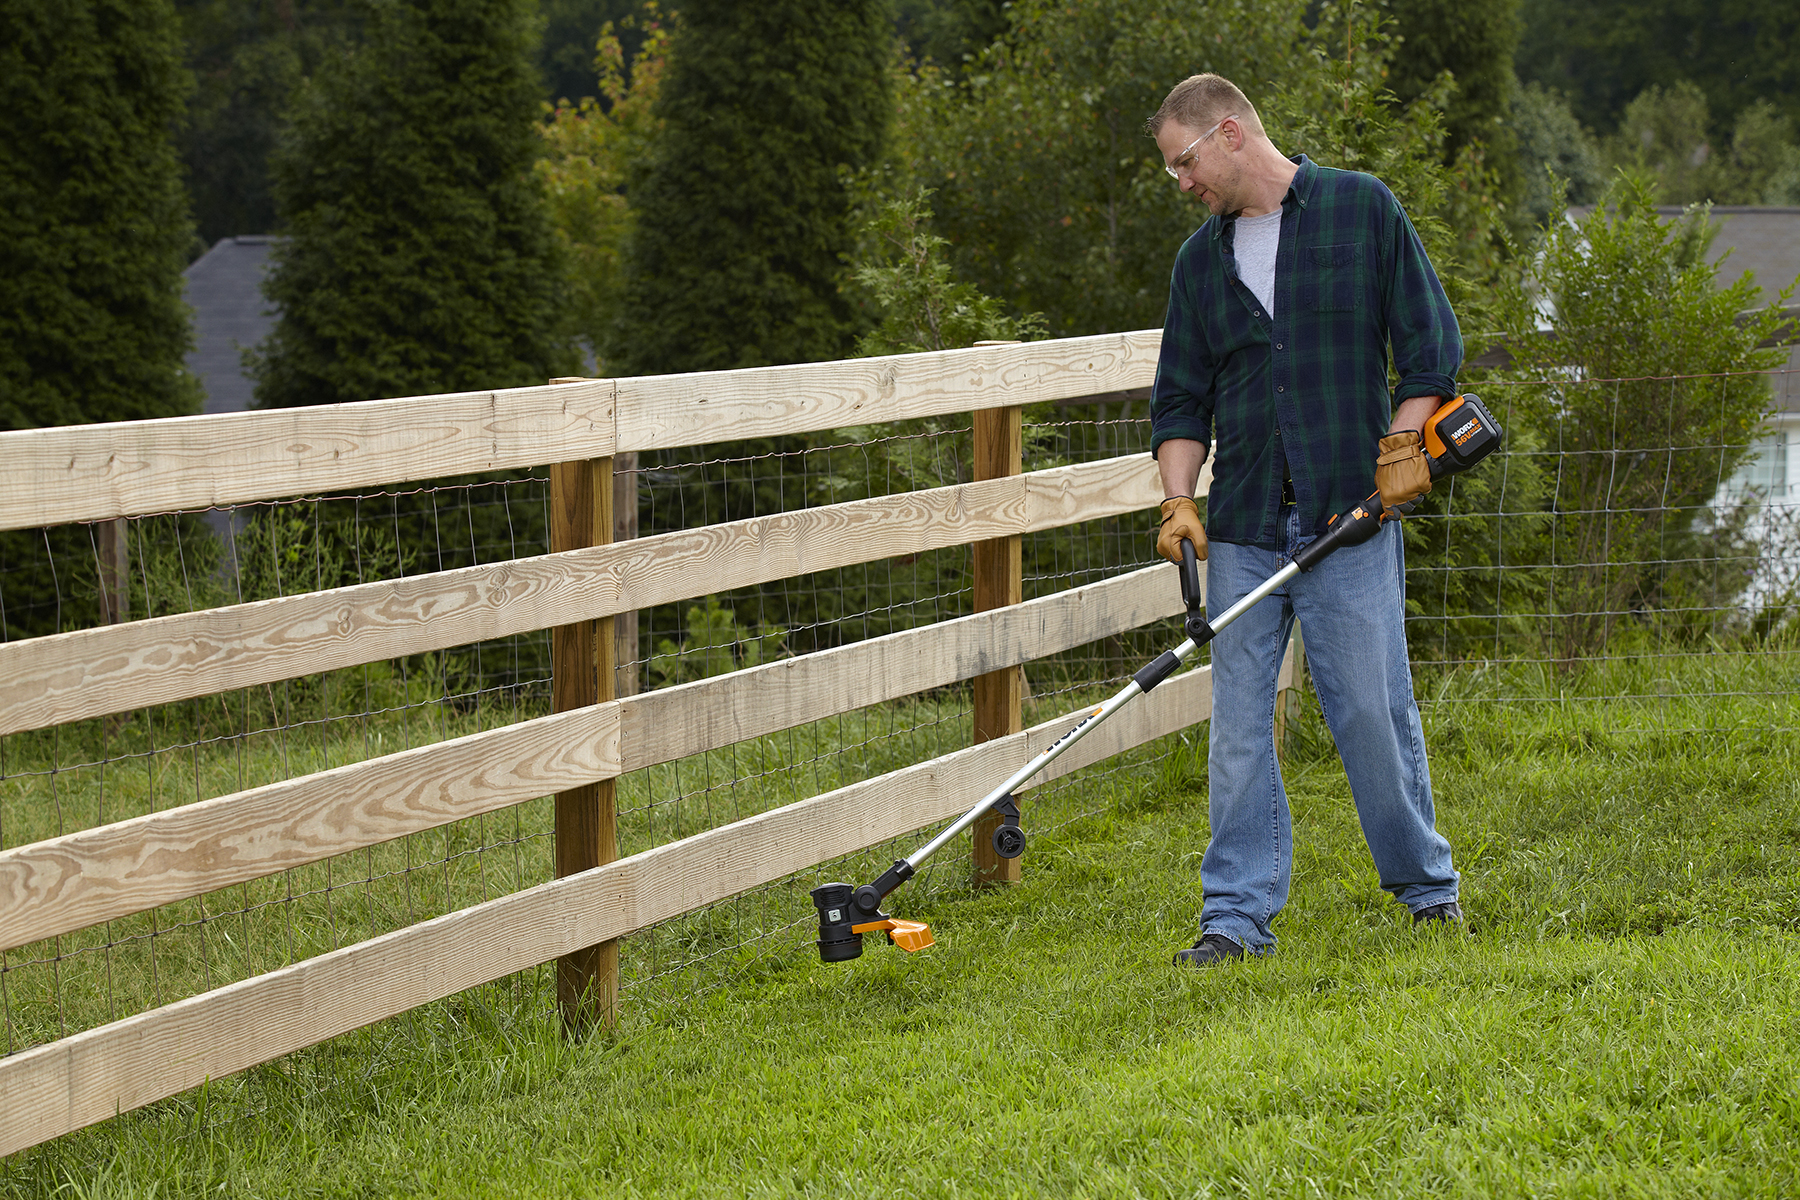 WORX 56V Trimmer/Edger easily trims in hard-to-reach areas.